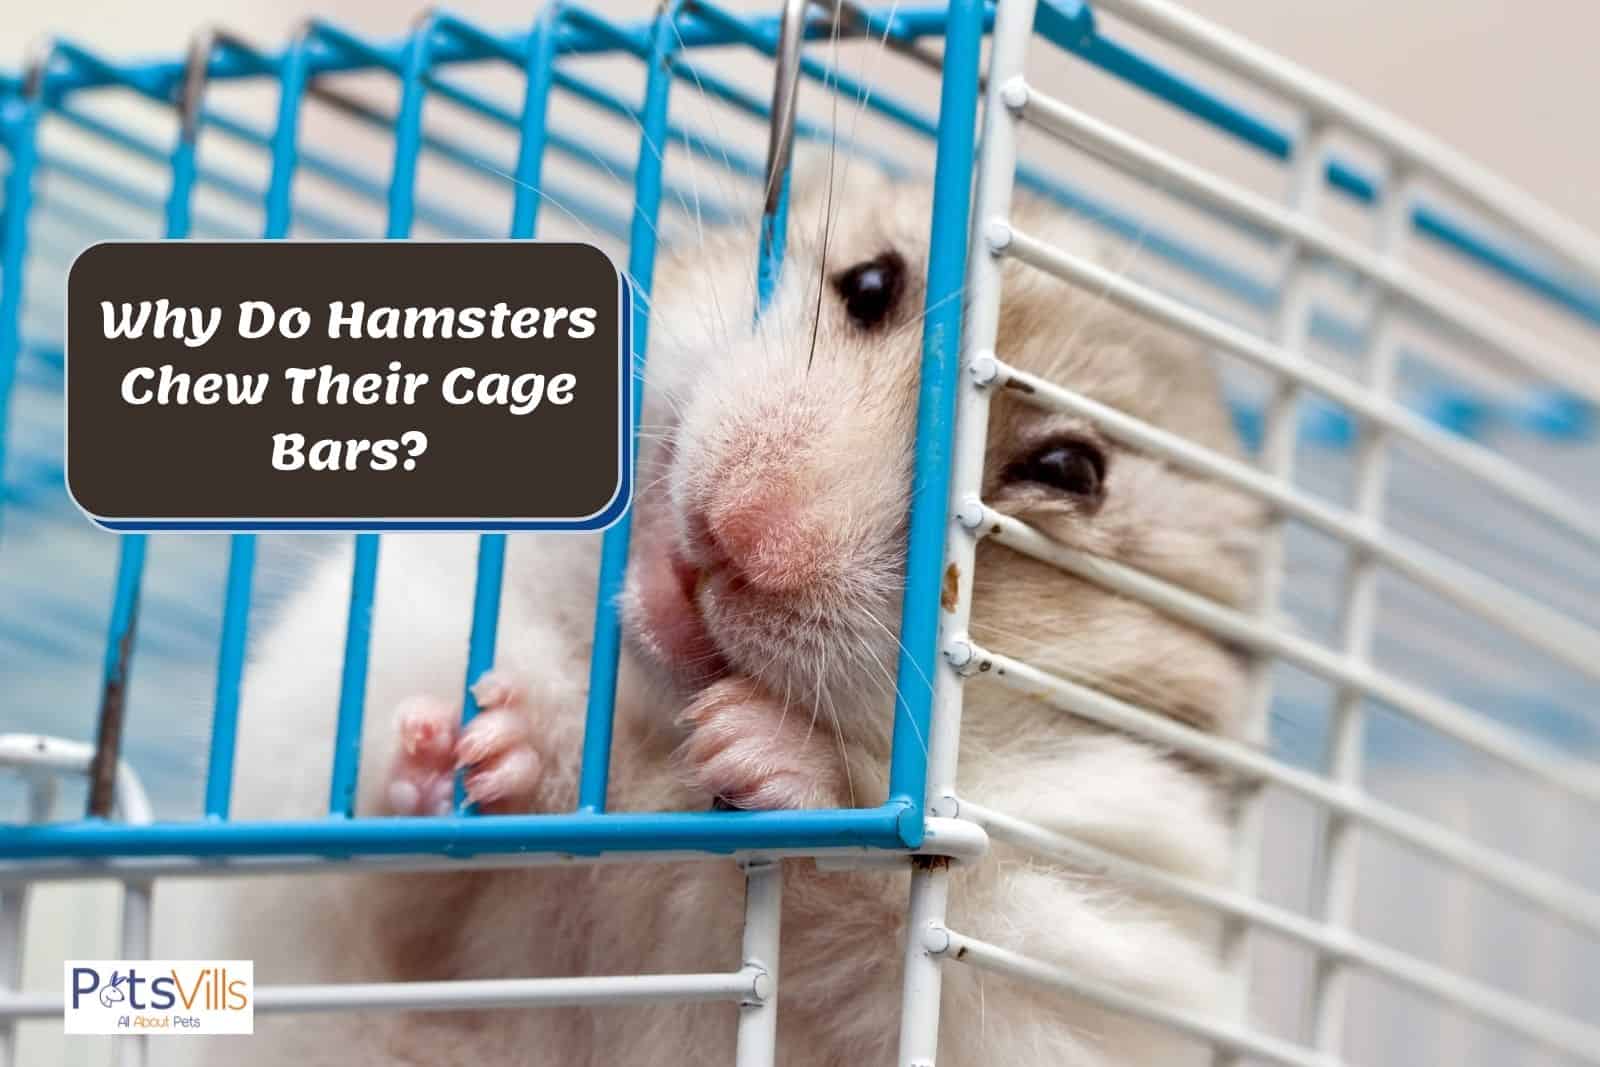 a hamster biting cage, why do hamsters bite their cage